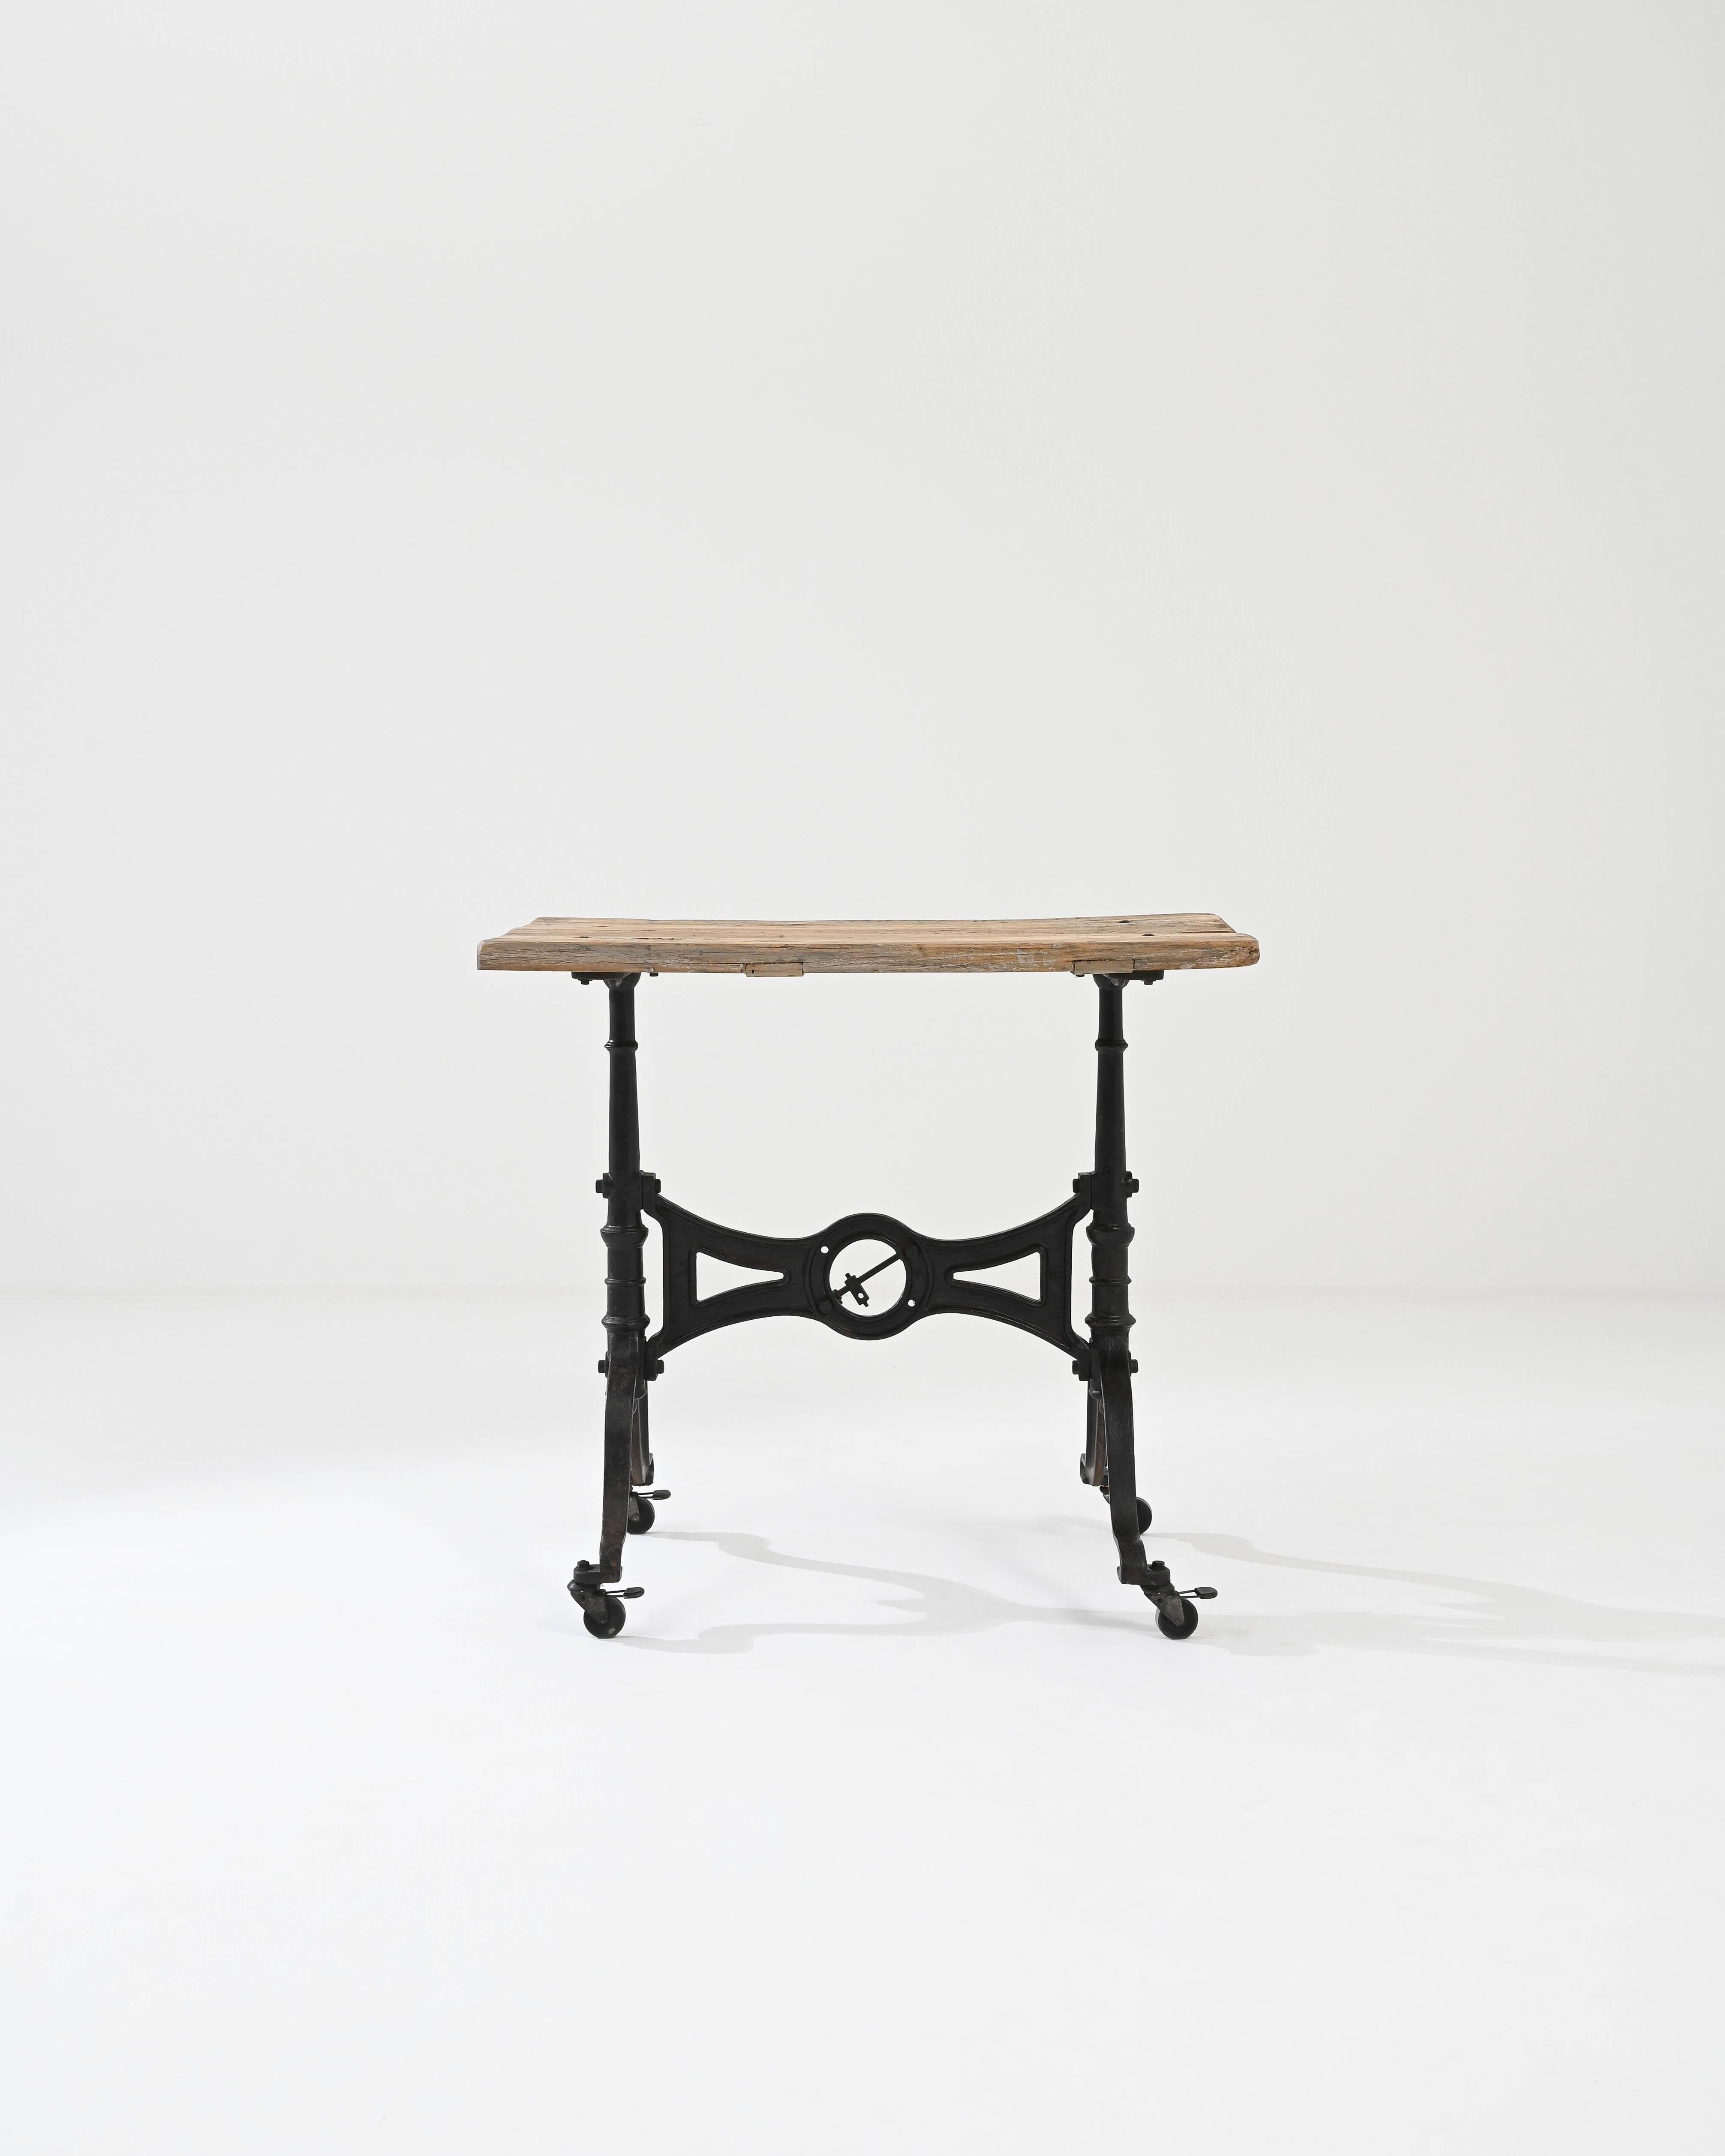 This bistro table provides a charming and idiosyncratic vintage piece. Made in France at the turn of the century, a metal frame creates a striking silhouette: bold curves and refined symmetries forged in metal reflect the materials and aesthetics of